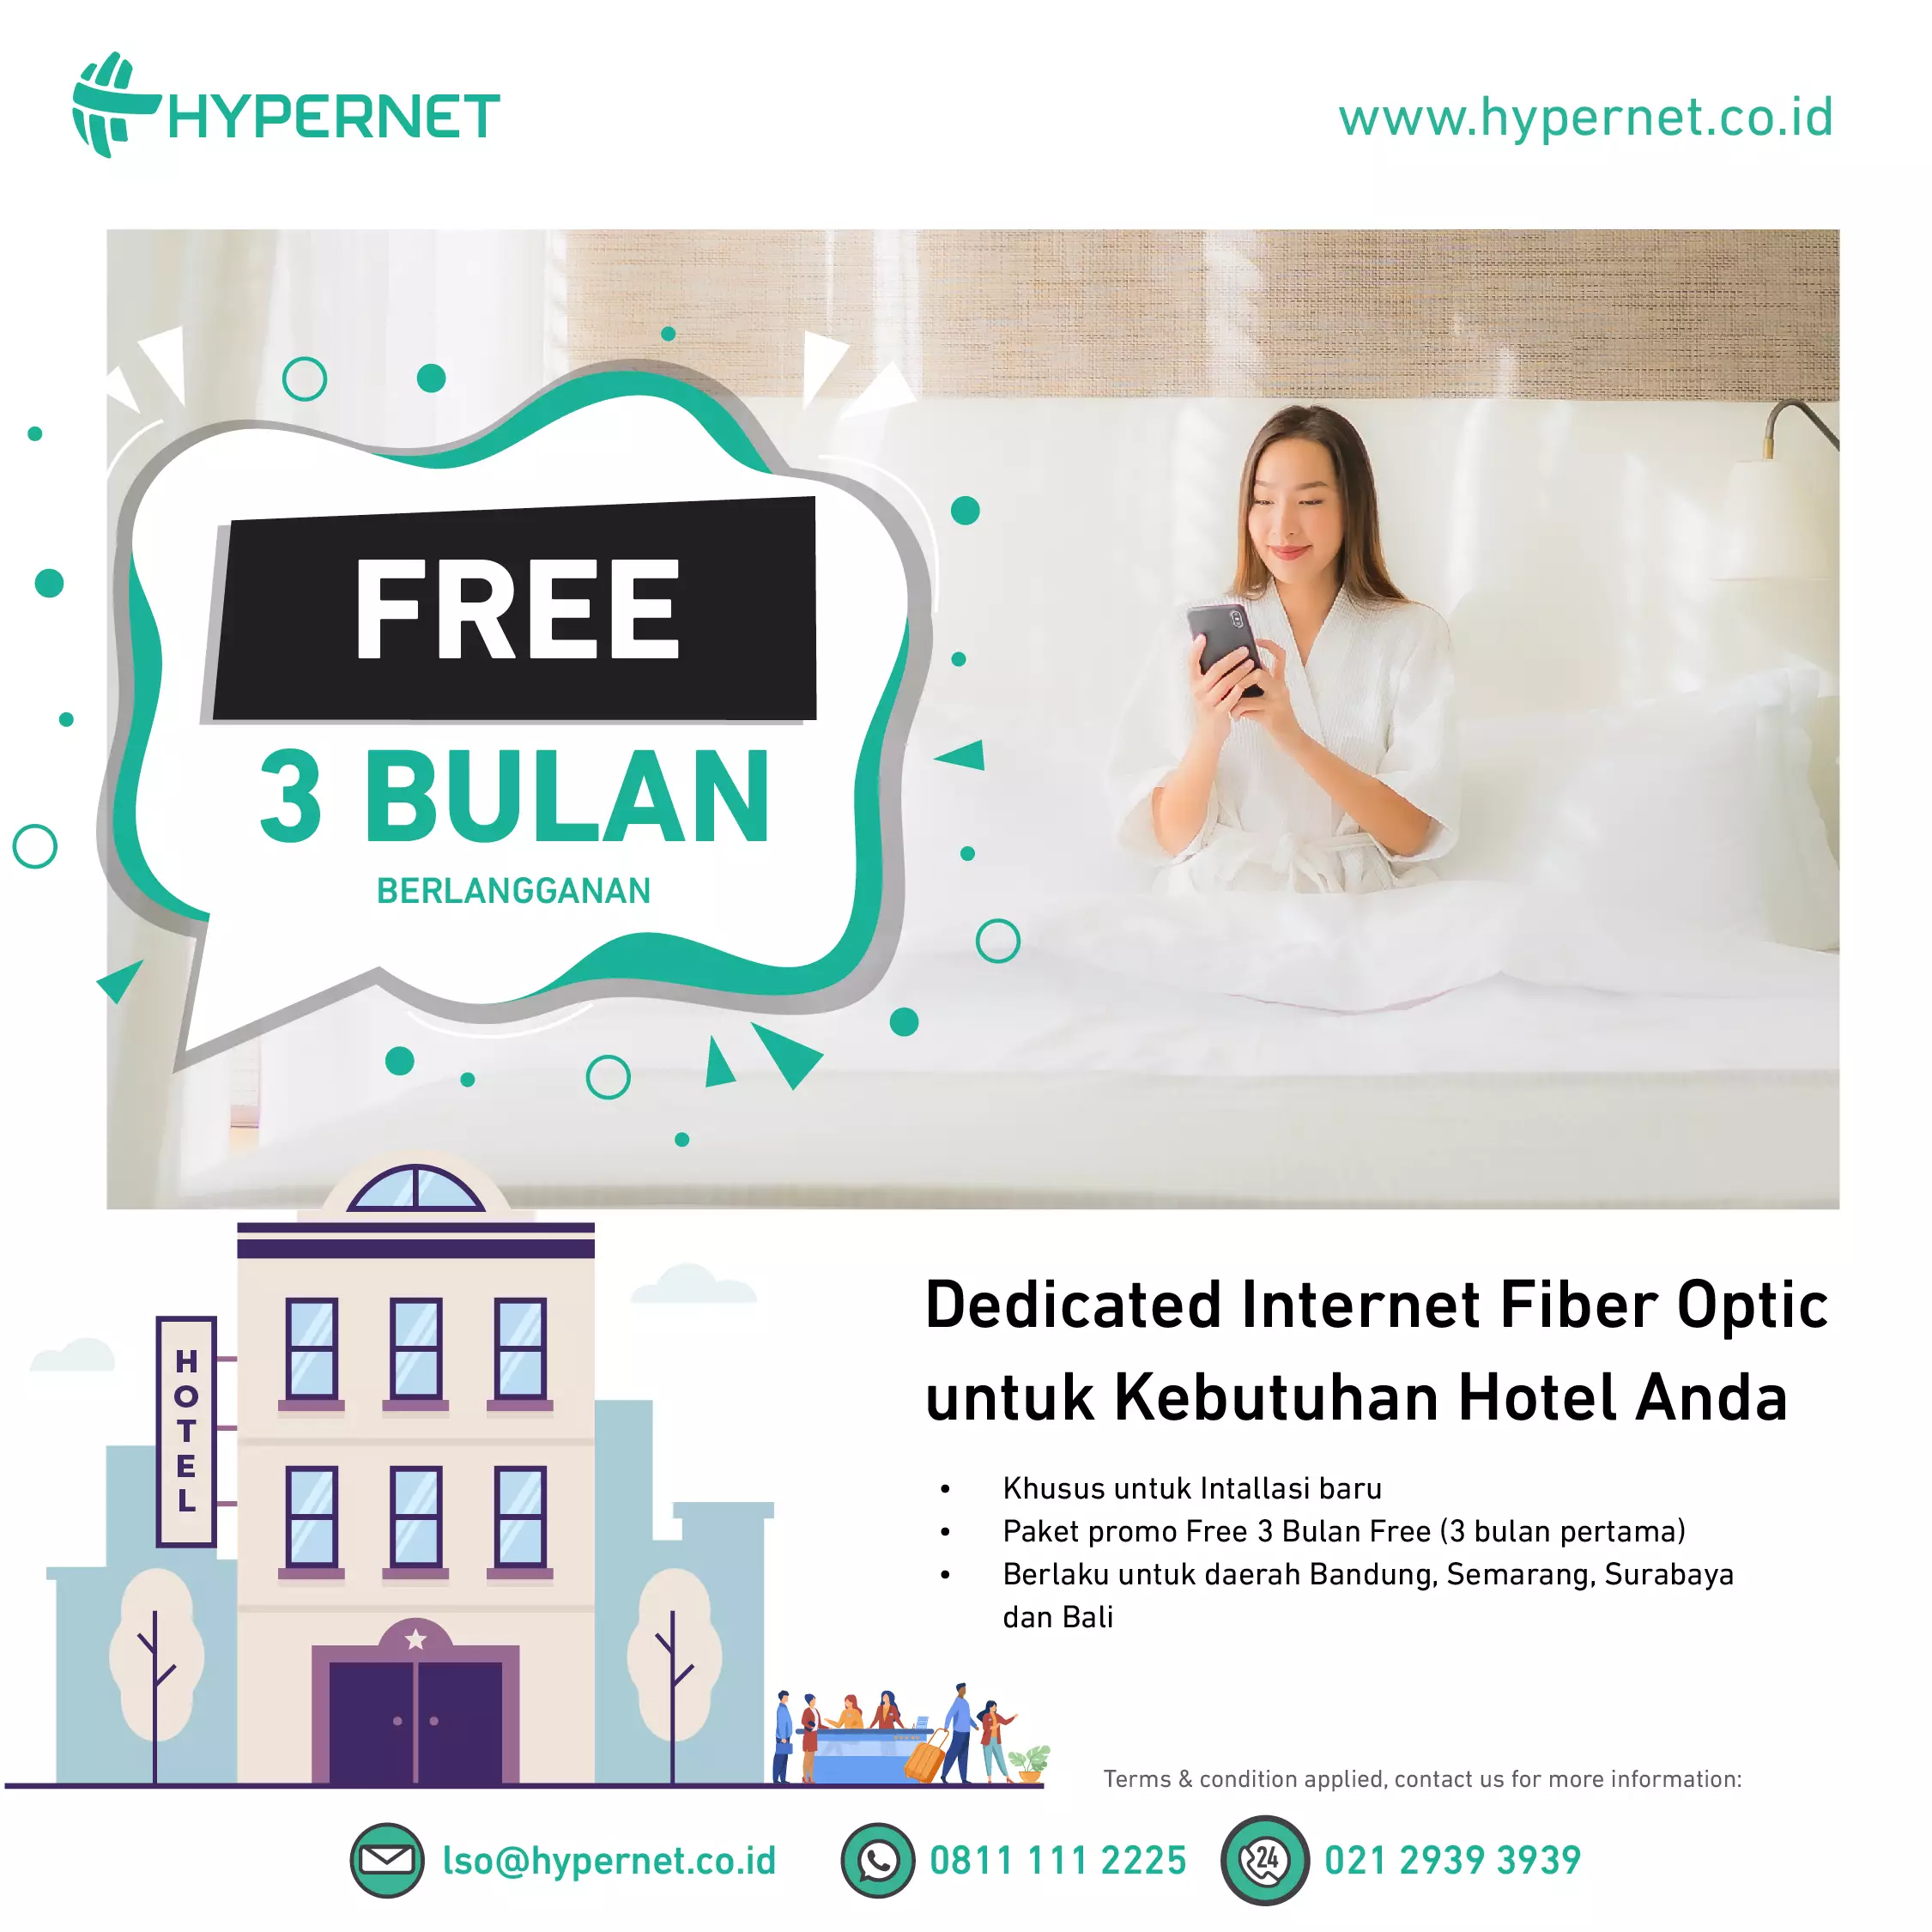 Free 3 Month Subscription for Hospitality Promo